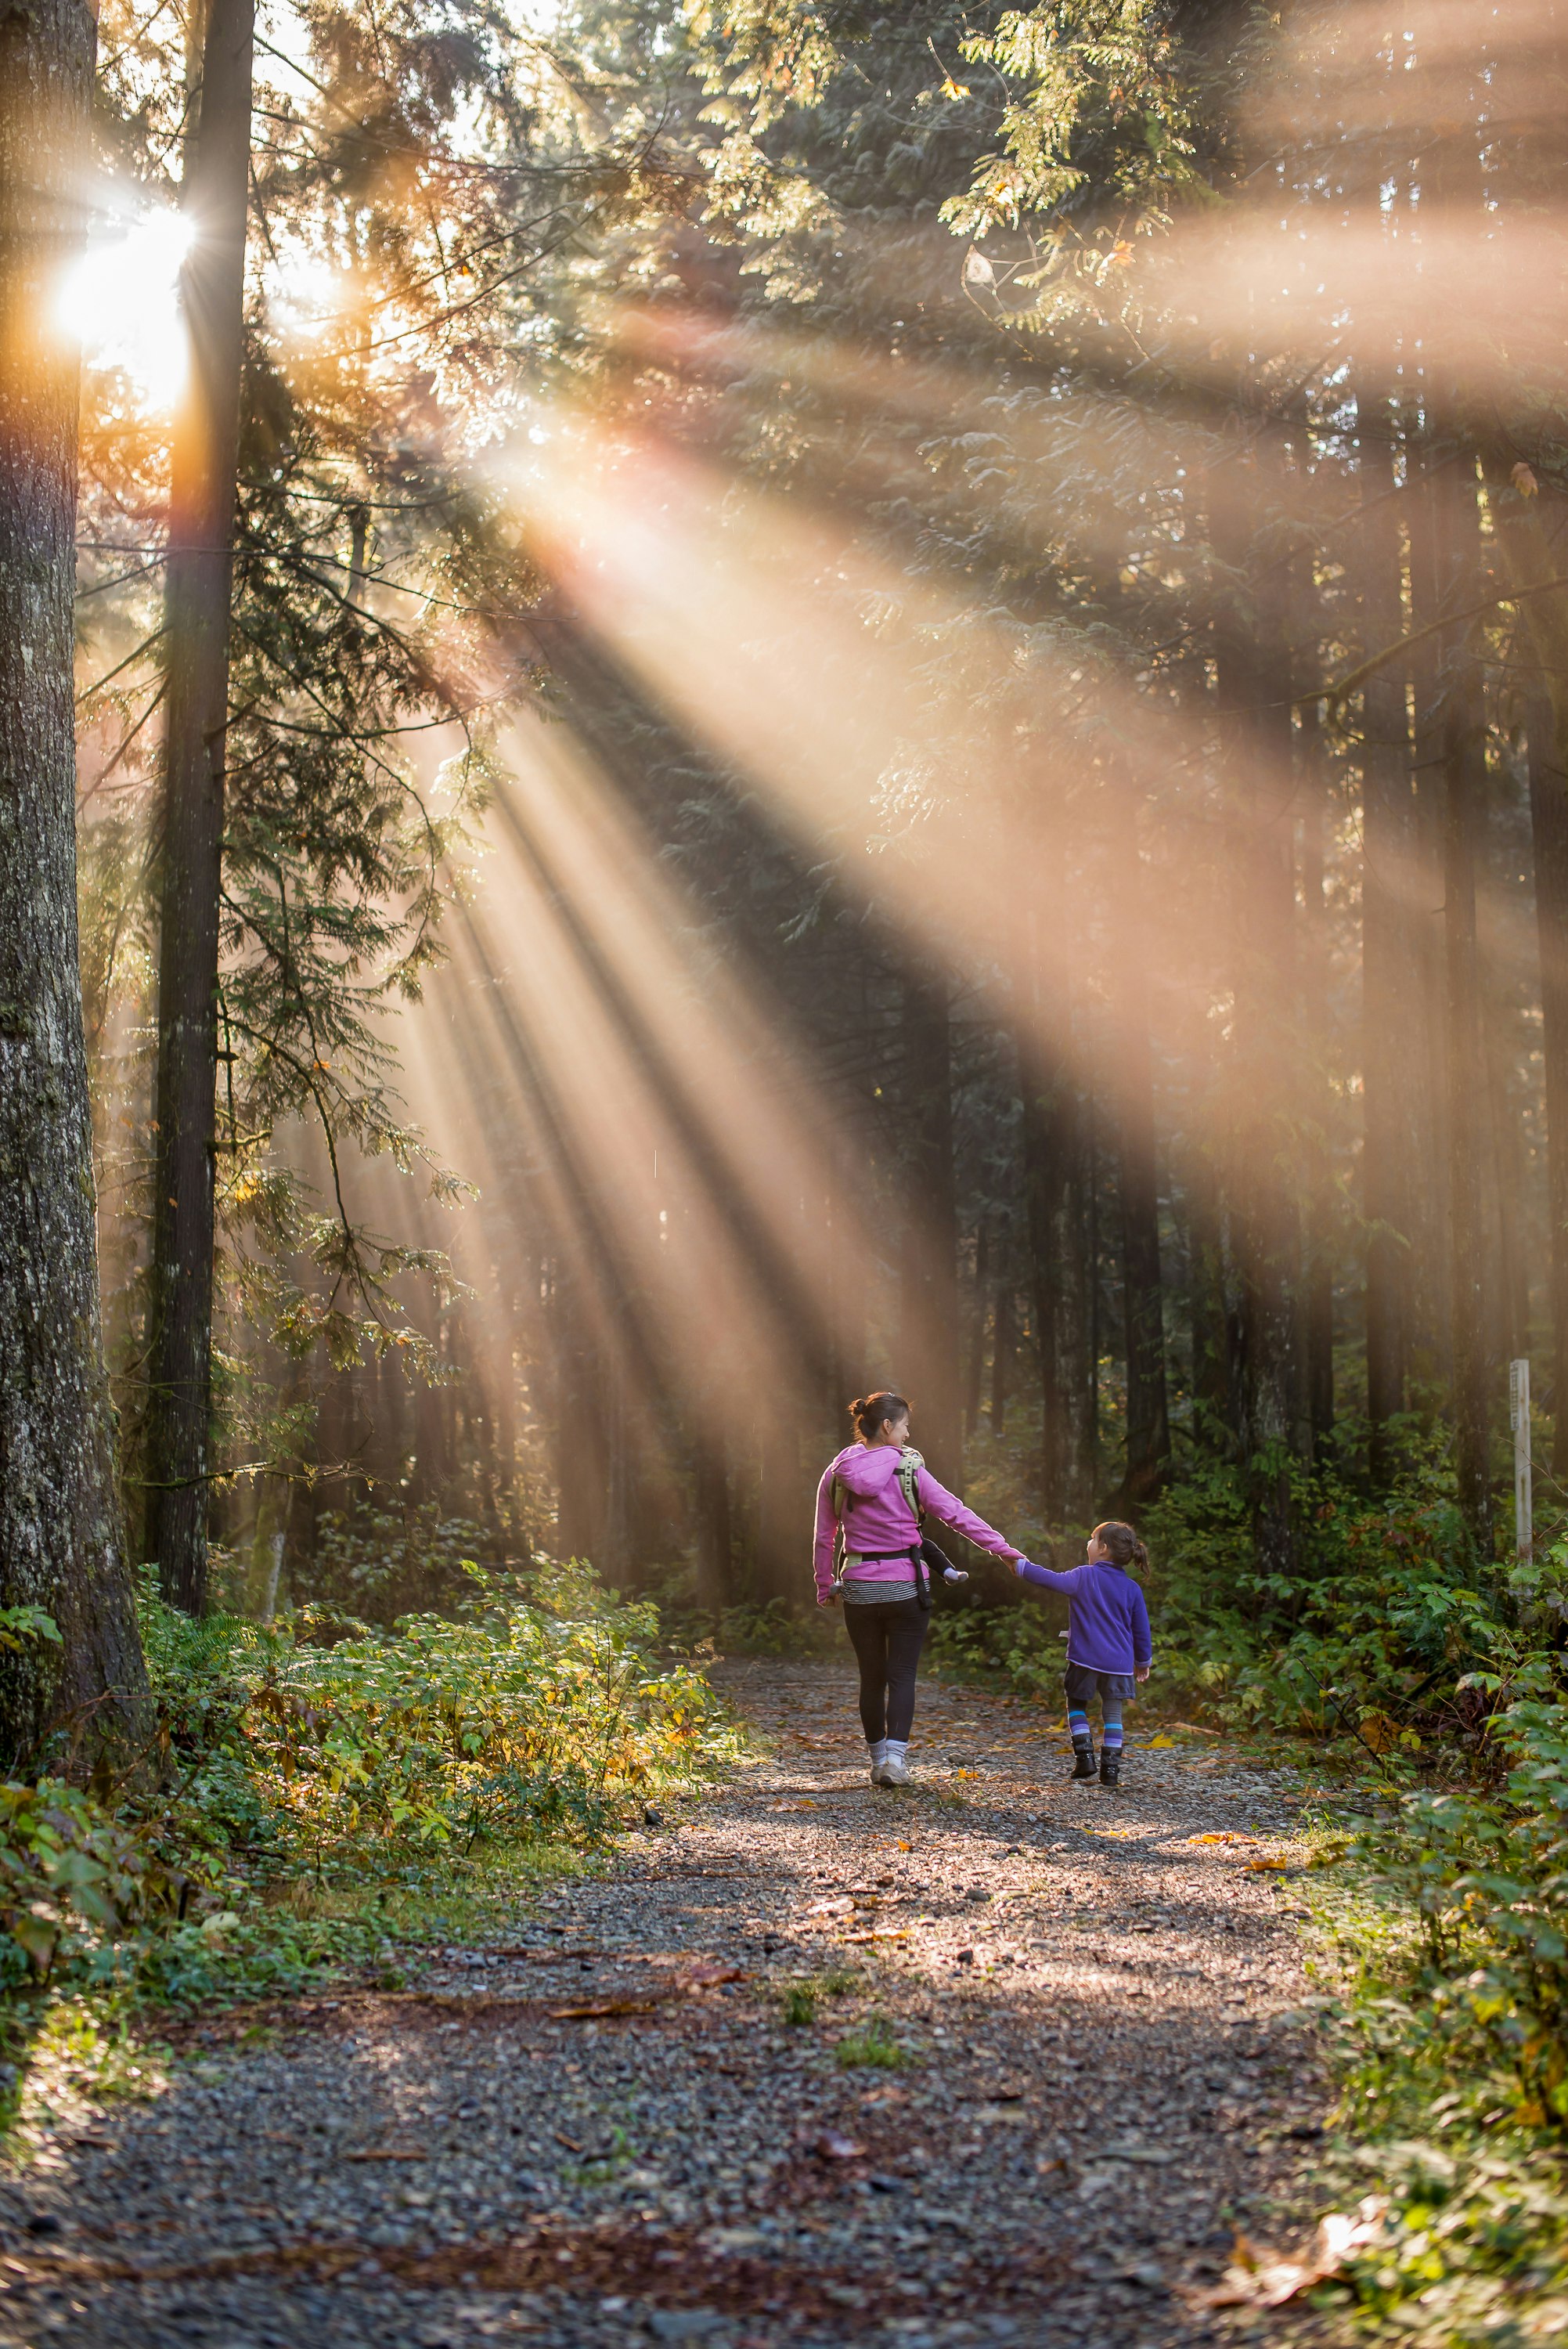 Sun rays beating down on mother and daughter walking in forest